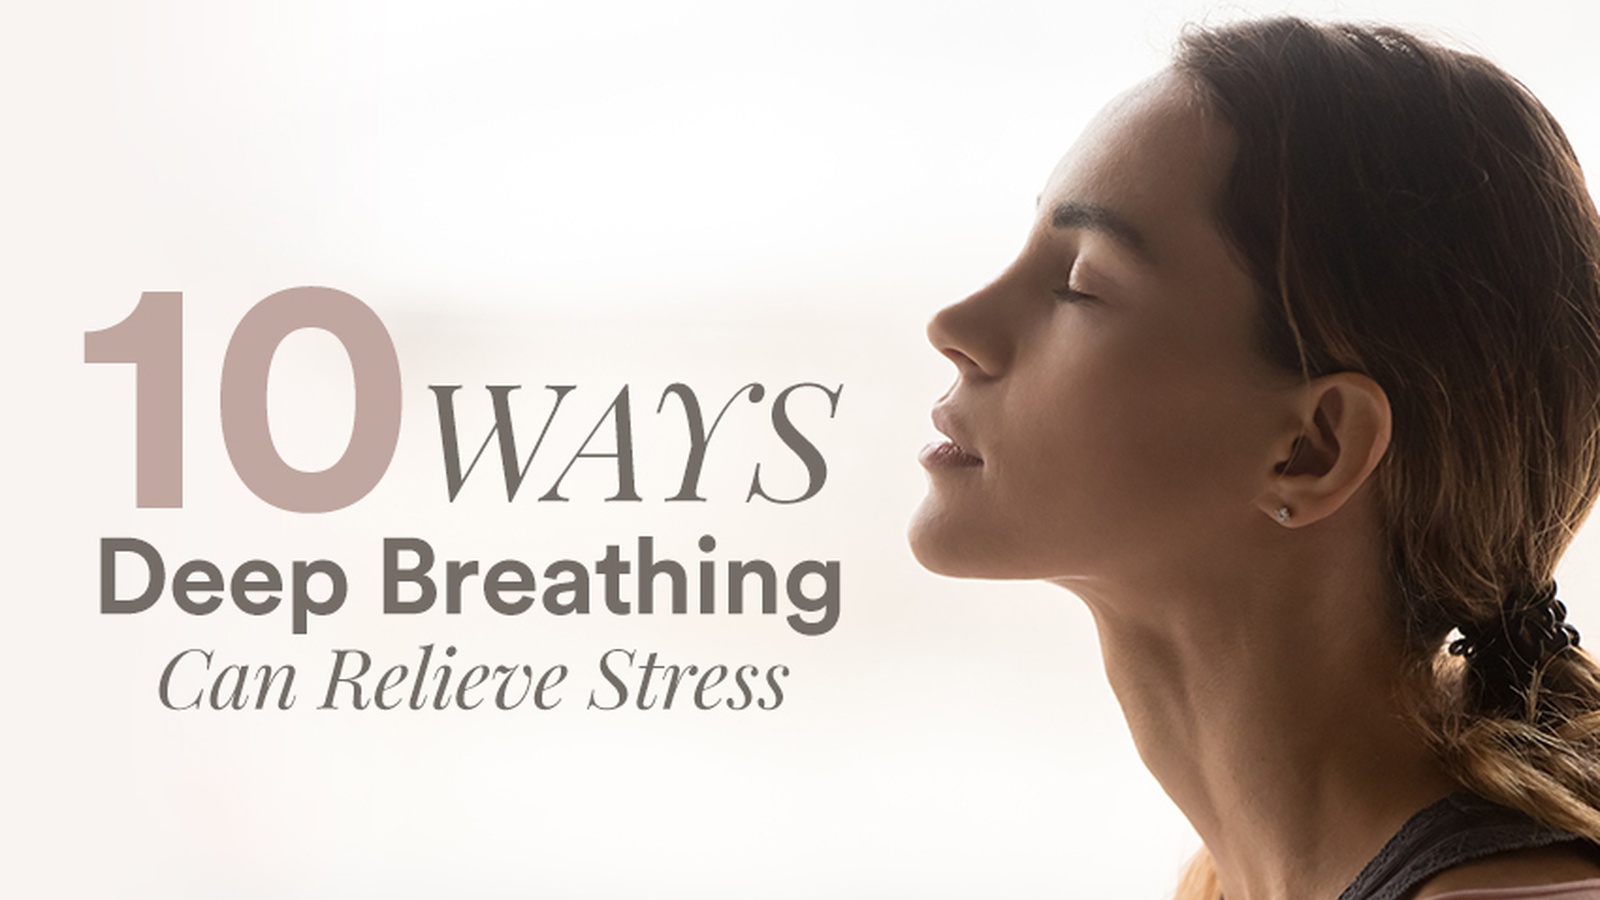 10 Ways Deep Breathing Can Relieve Stress